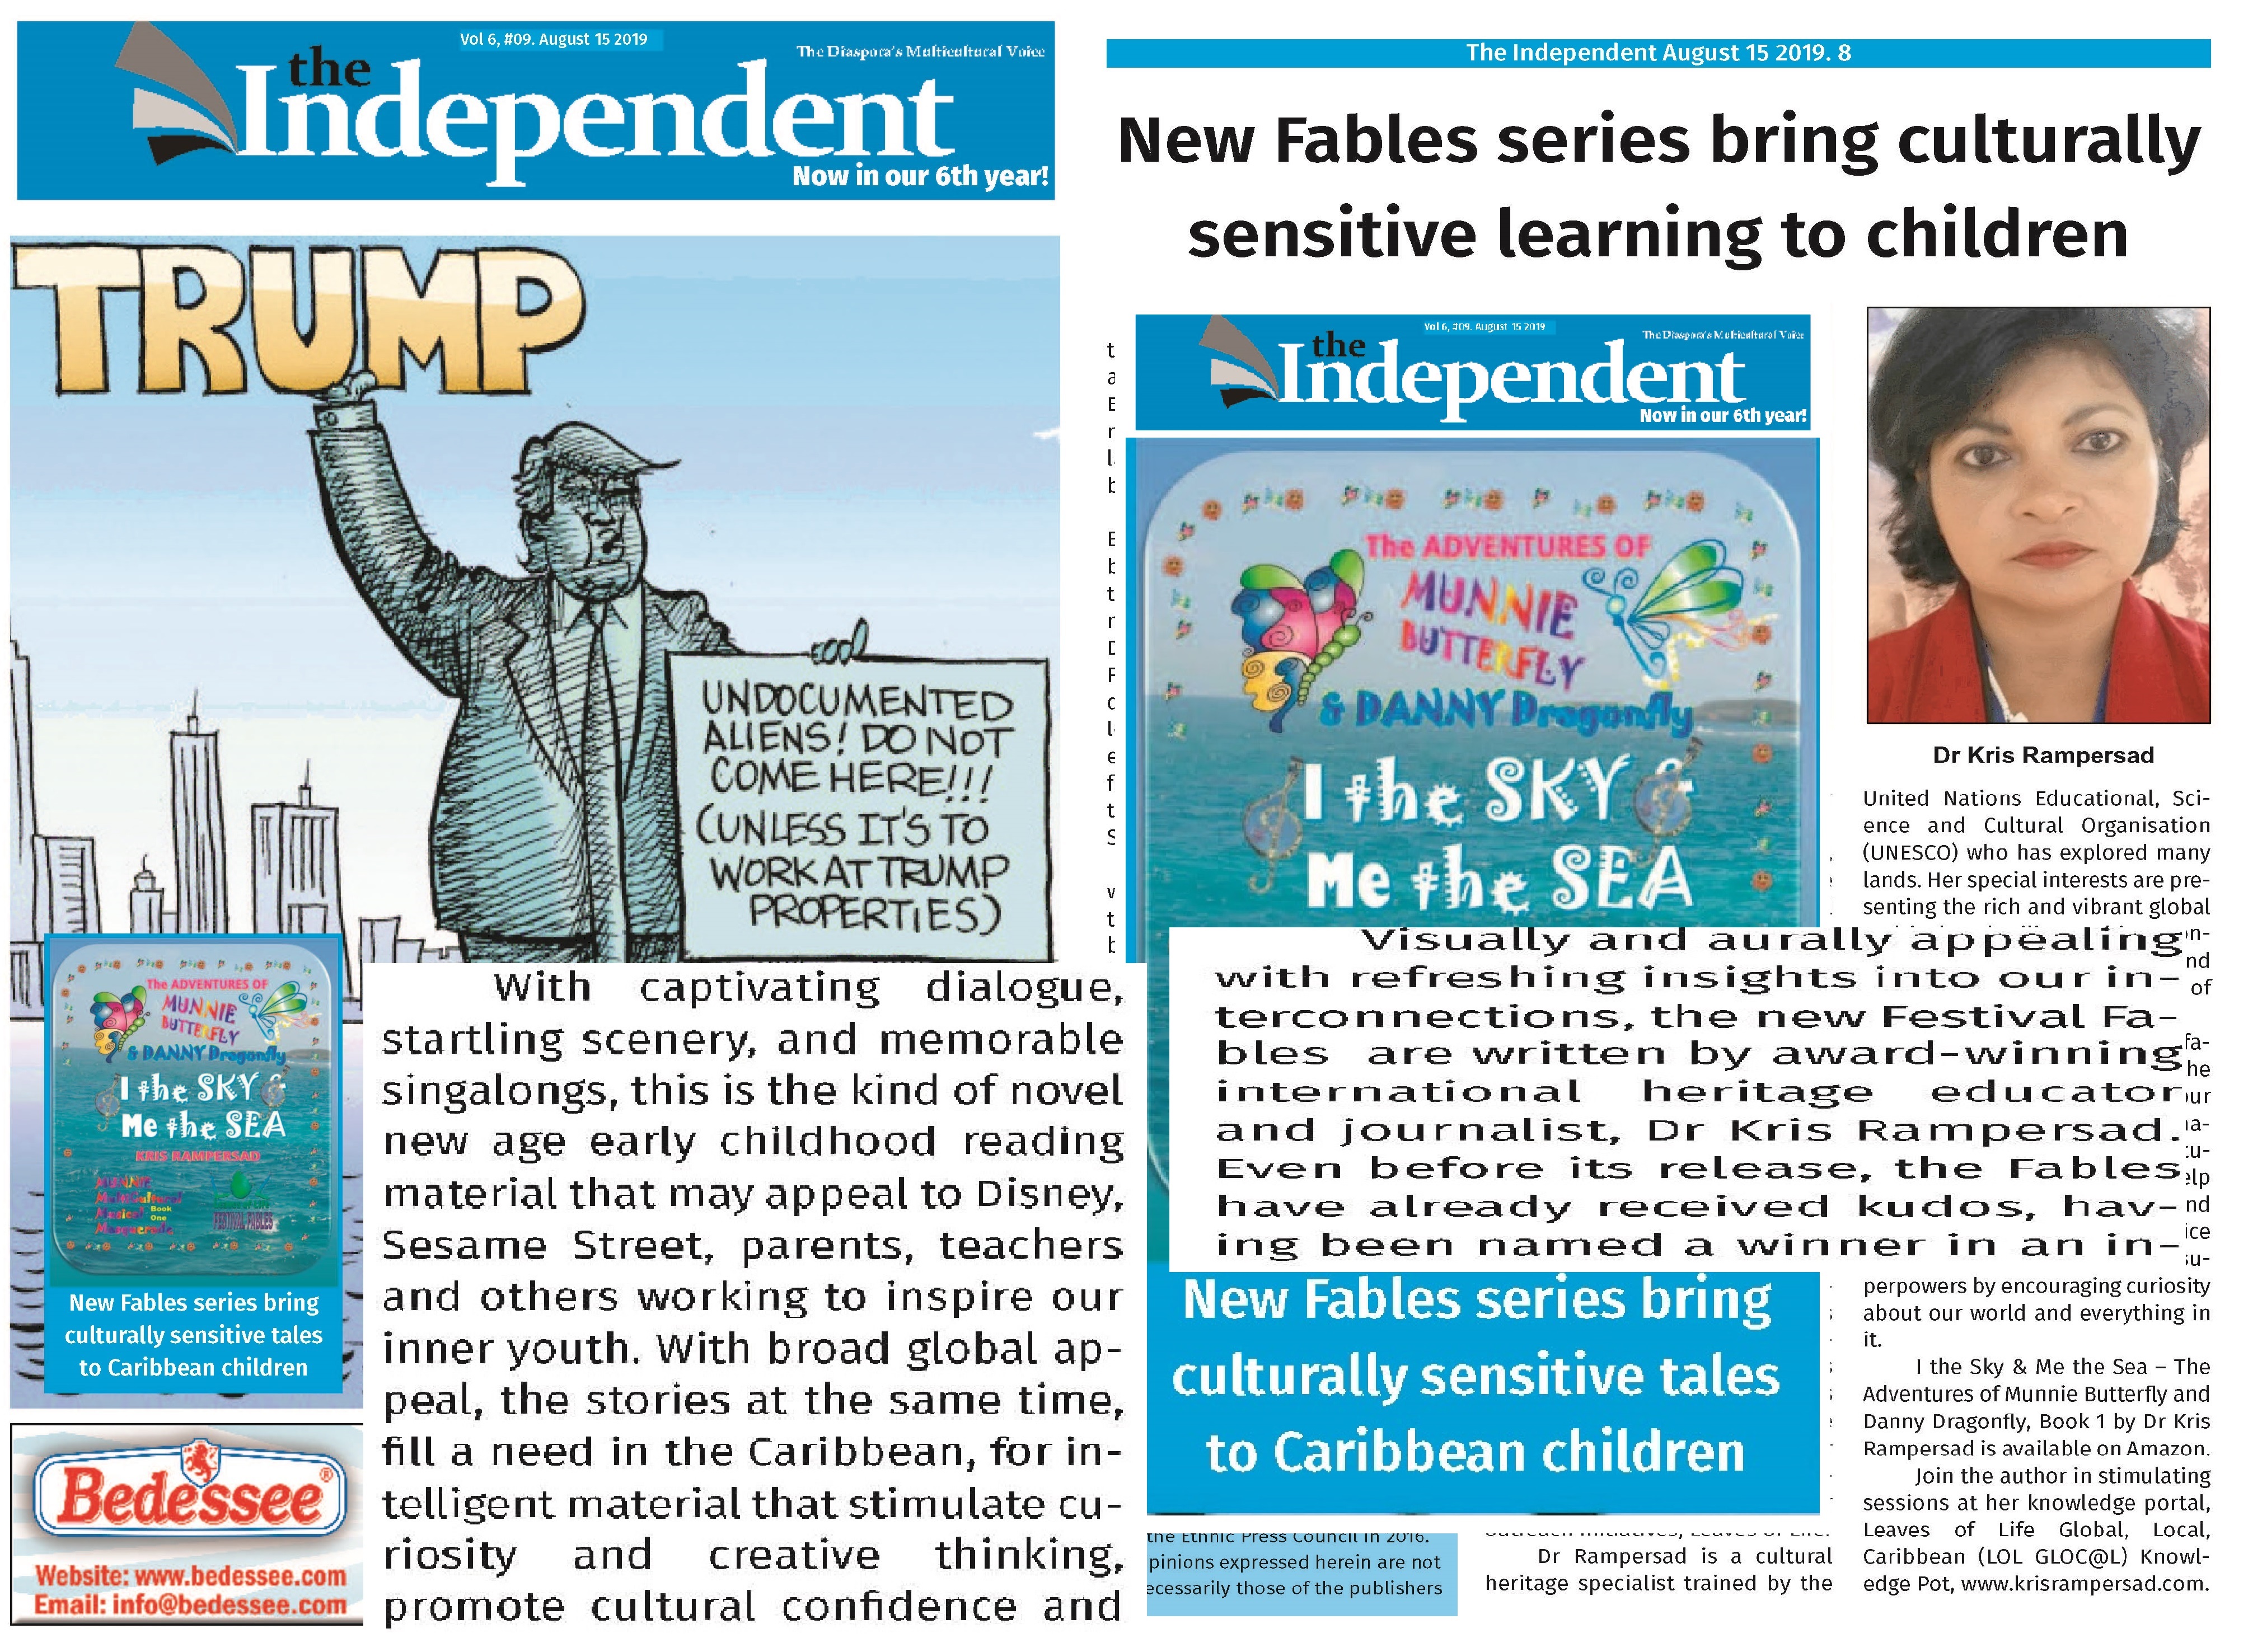 Independent Newspaper, Canada gives front page treatment to Dr Kris Rampersad's I the Sky & Me the Sea, in promoting culture-sensitive education, juxtaposed with cartoon of US President, Donald Trump policy on immigrants